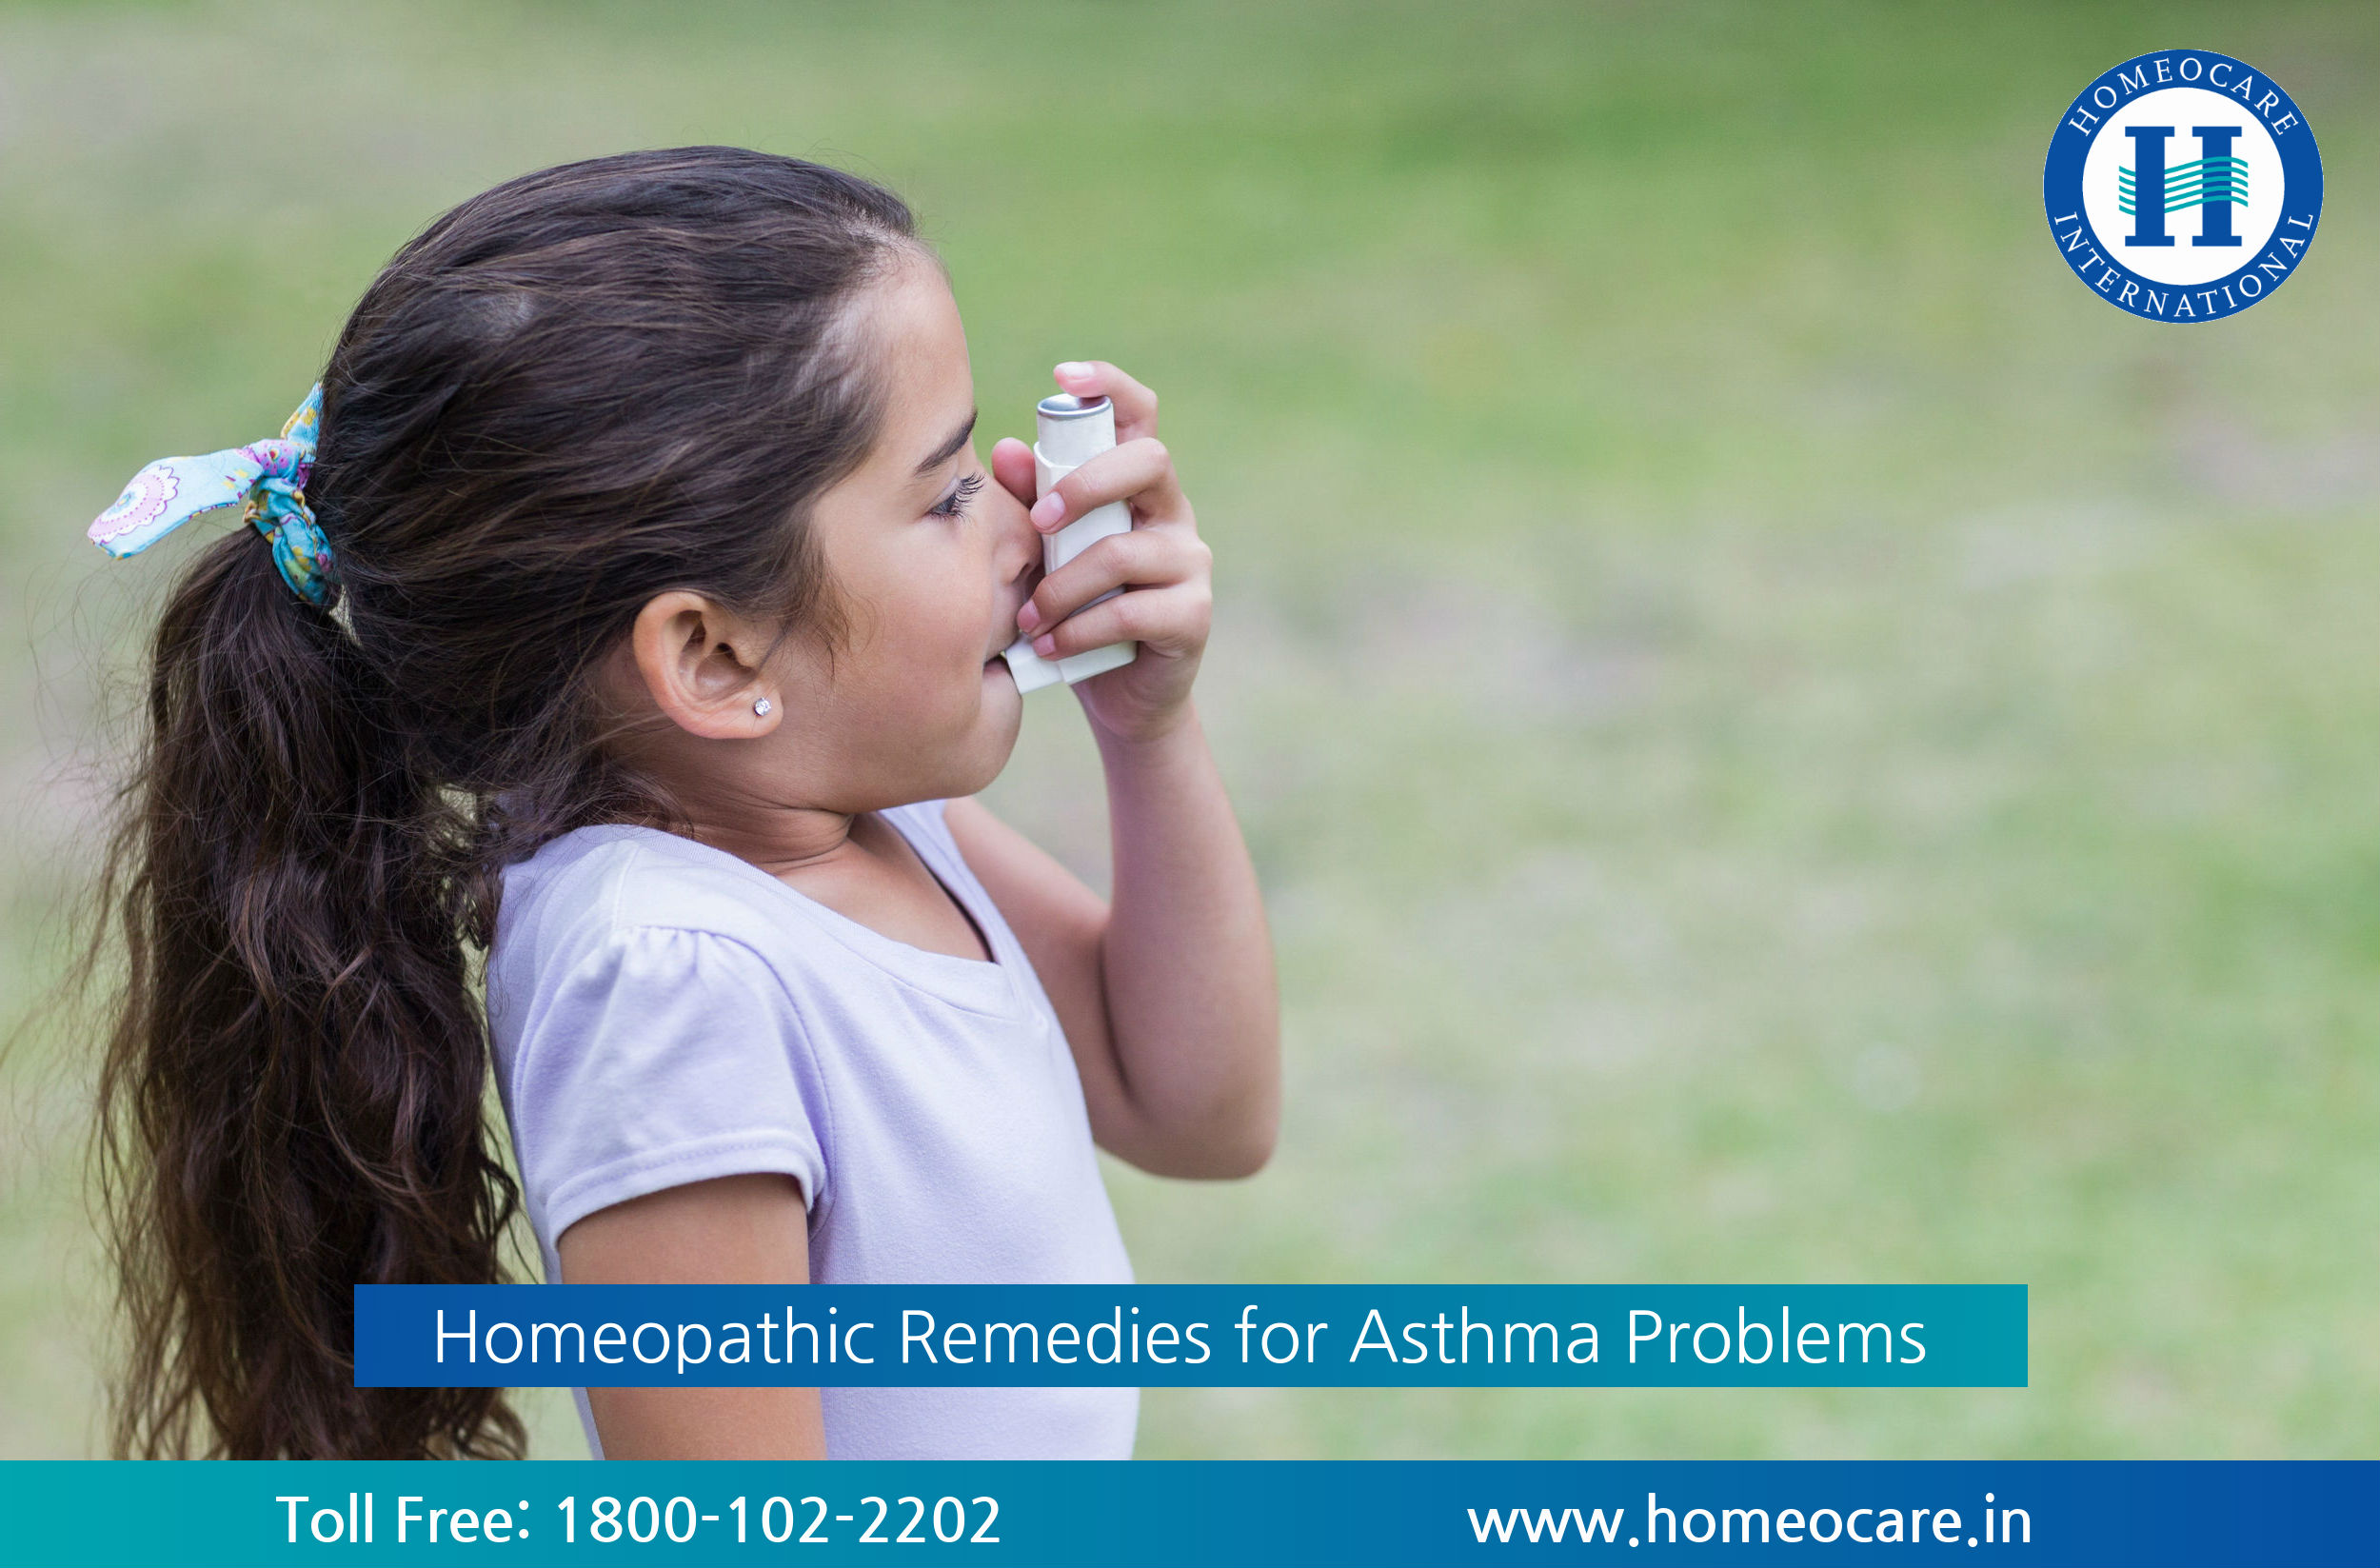 Homeopathic Remedies for Asthma